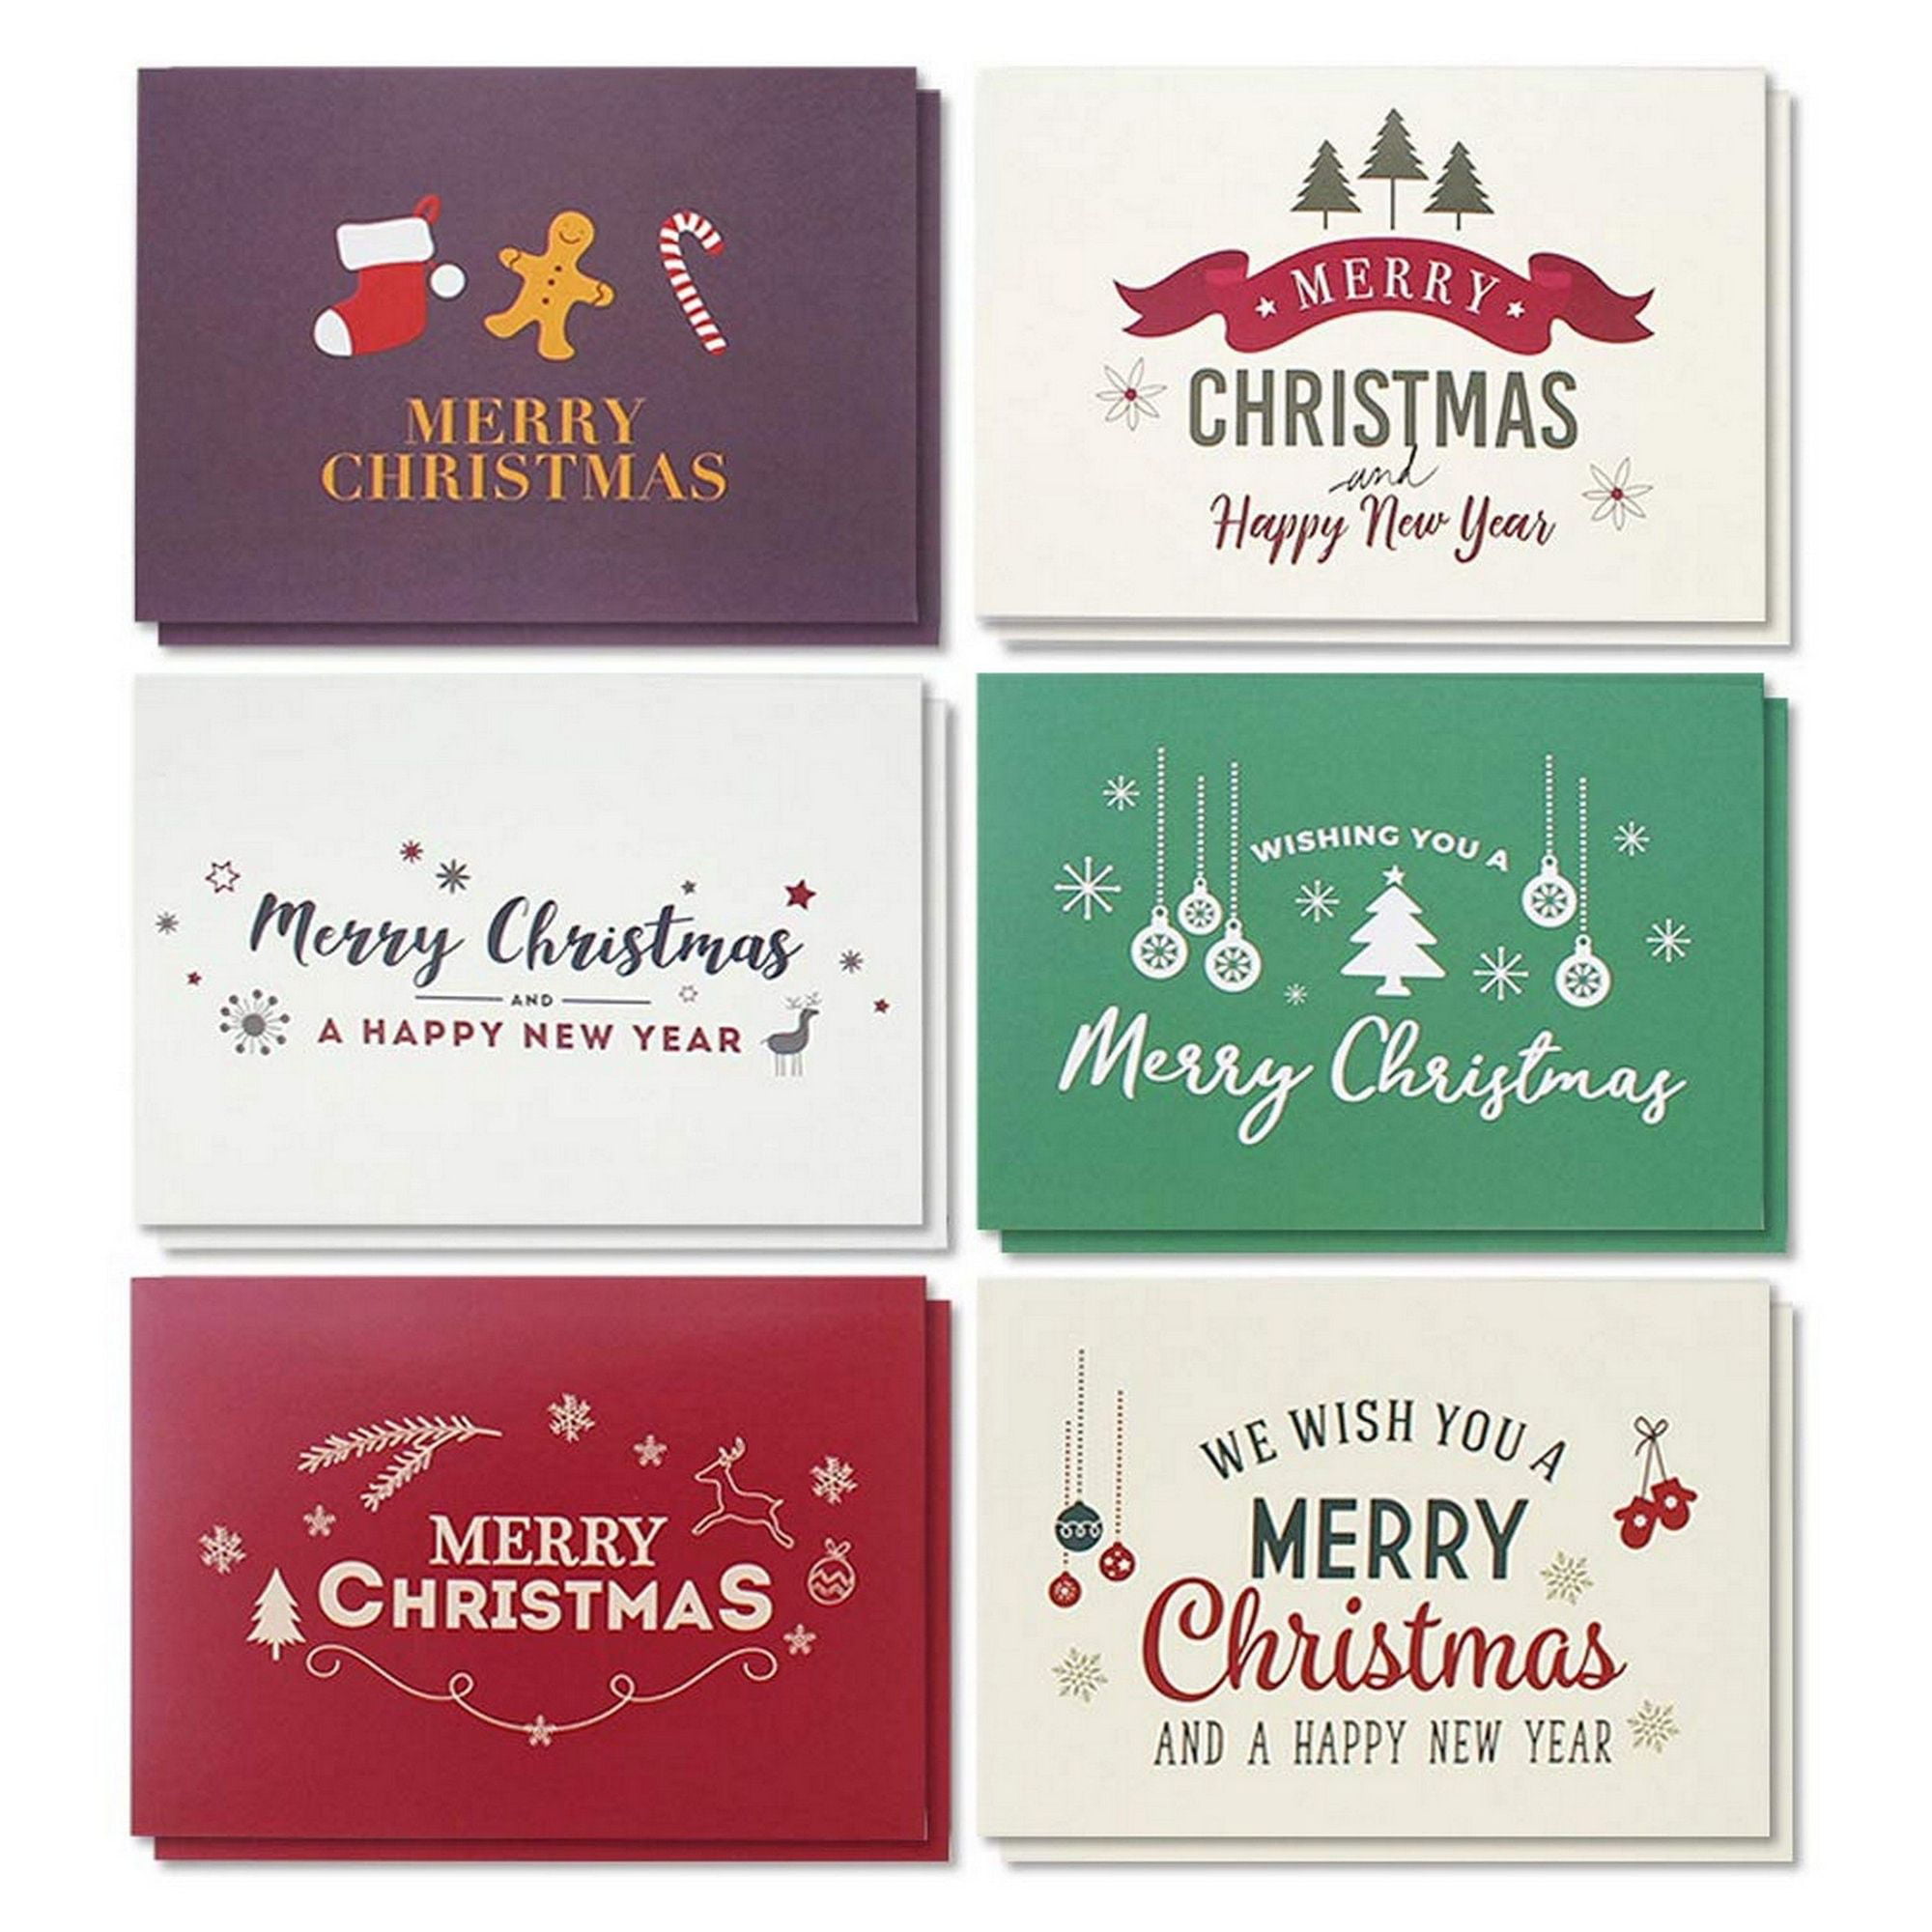 48 Pack Merry Christmas Greeting Cards Bulk Box Set Winter Holiday Xmas Greeting Cards With Retro Modern Designs Envelopes Included 4 X 6 Inches Walmart Com Walmart Com